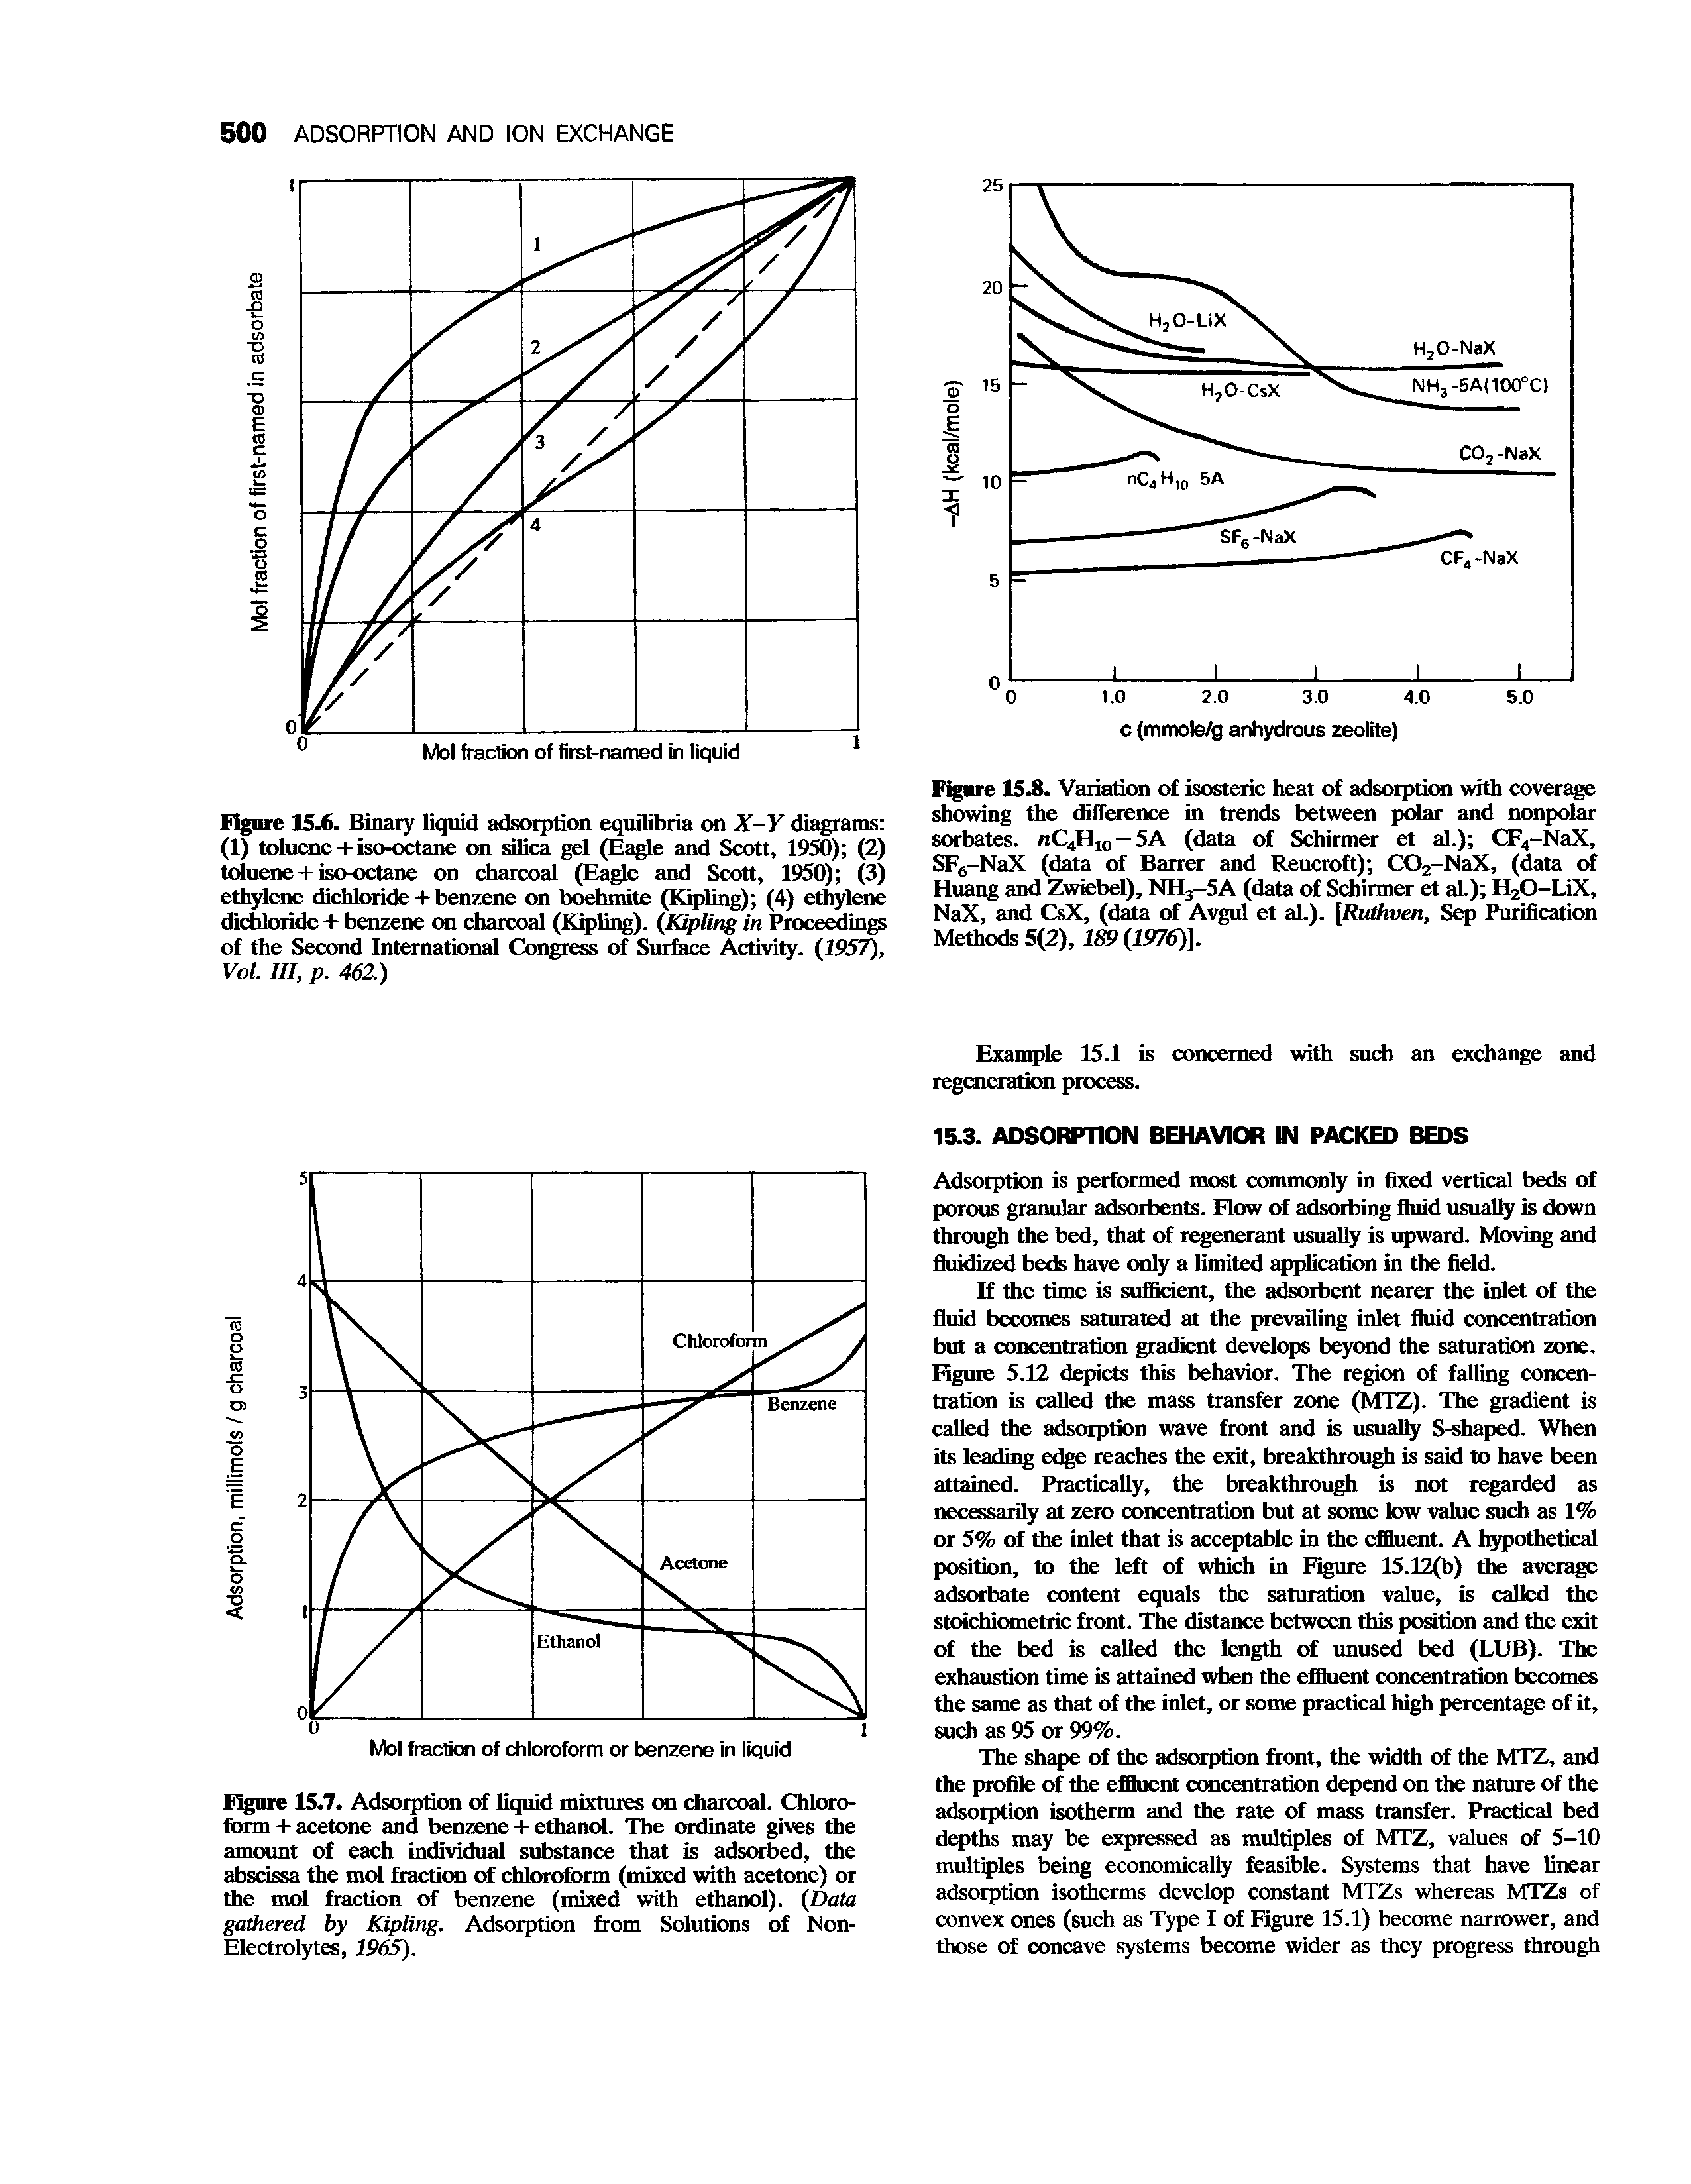 Figure 15.7. Adsorption of liquid mixtures on charcoal. Chloroform + acetone and benzene + ethanol. The ordinate gives the amount of each individual substance that is adsorbed, the abscissa the mol fraction of chloroform (mixed with acetone) or the mol fraction of benzene (mixed with ethanol). (Data gathered by Kipling. Adsorption from Solutions of Non-Electrolytes, 1965).